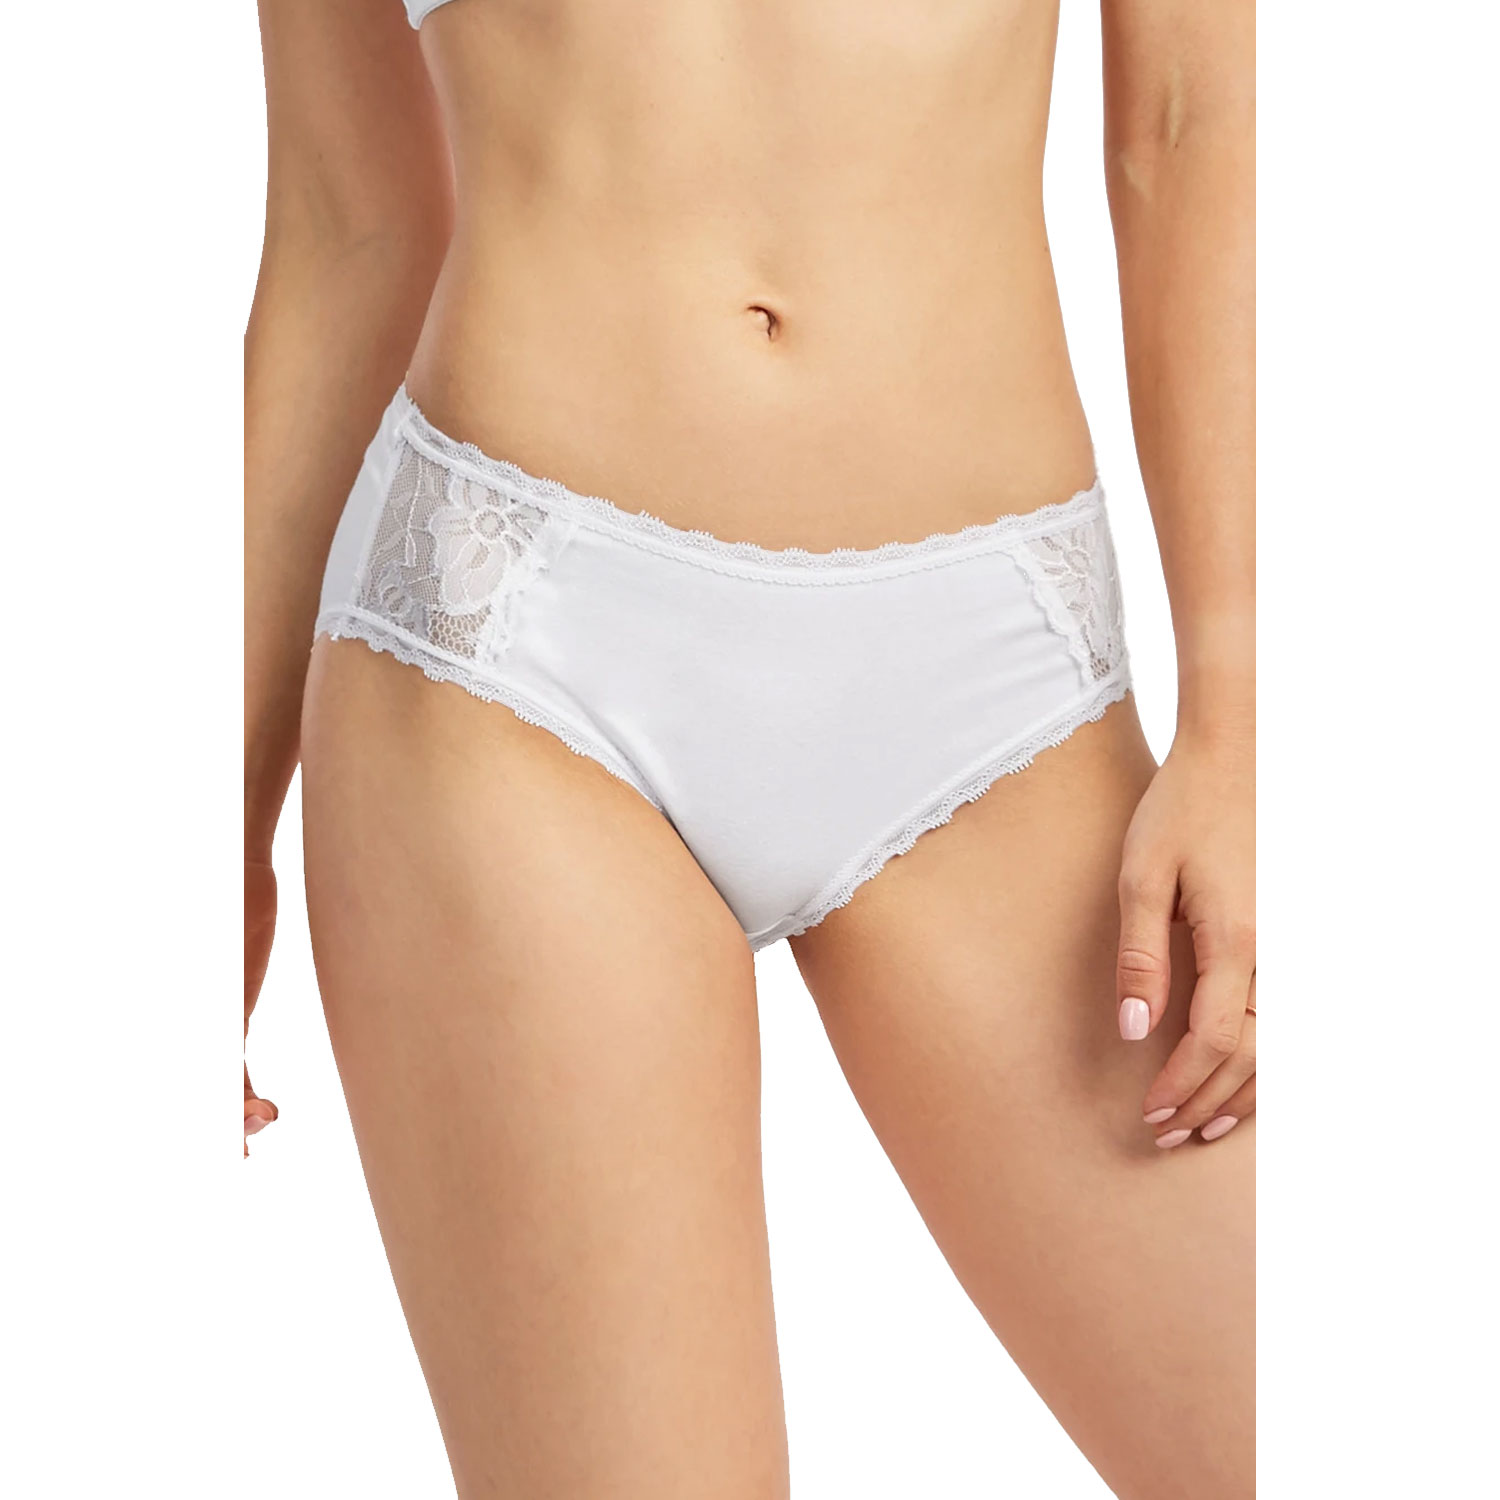 6 or 12-Pack Ladies Cotton Bikini Panty Extended